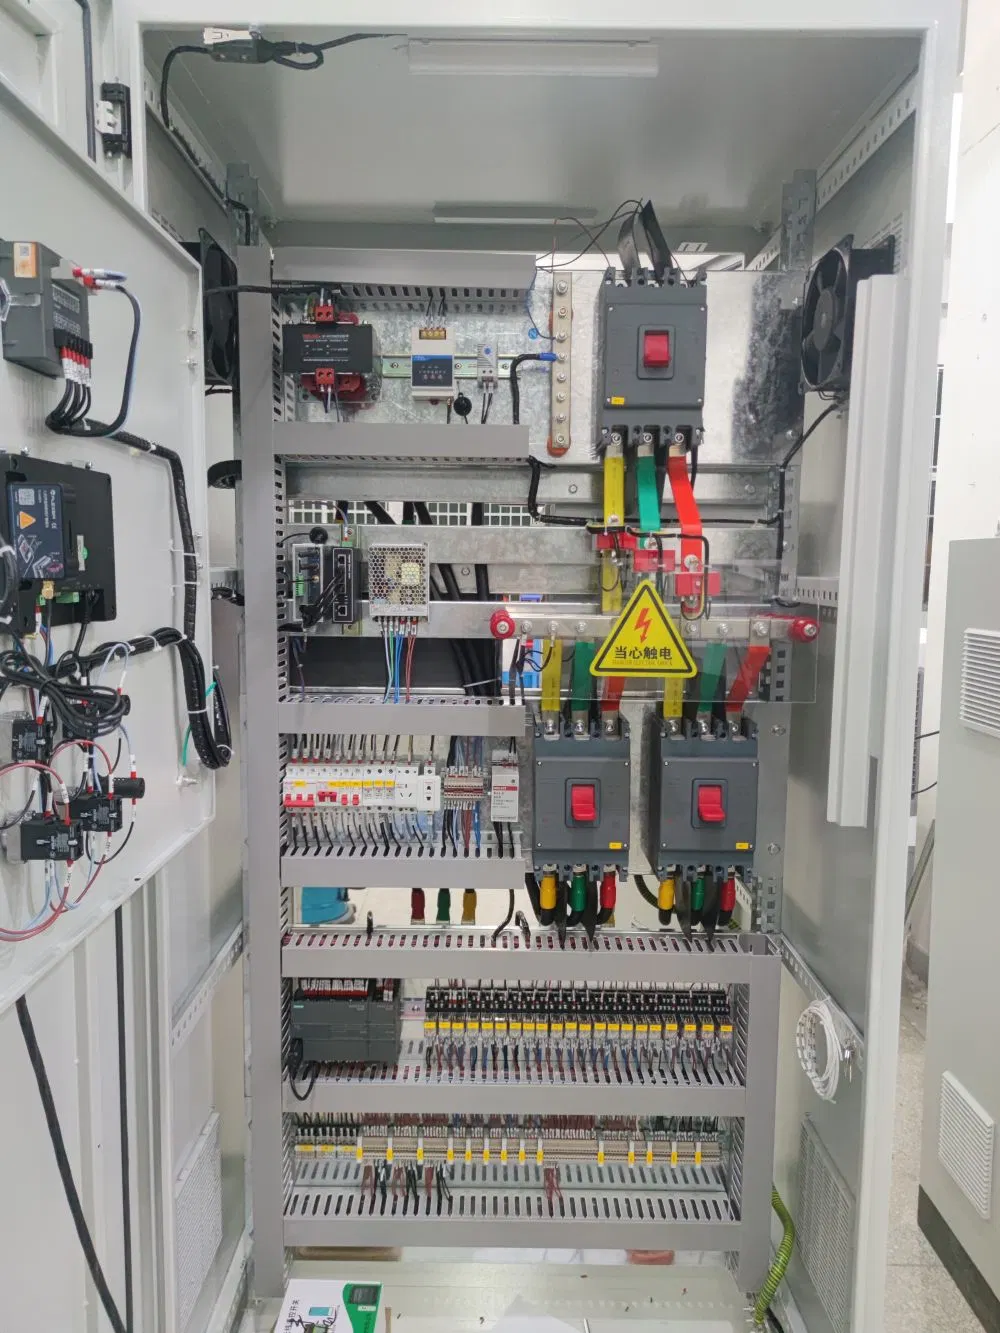 H Constant Pressure Water Supply Control Cabinet Electrical Mcc Control Panel Boards